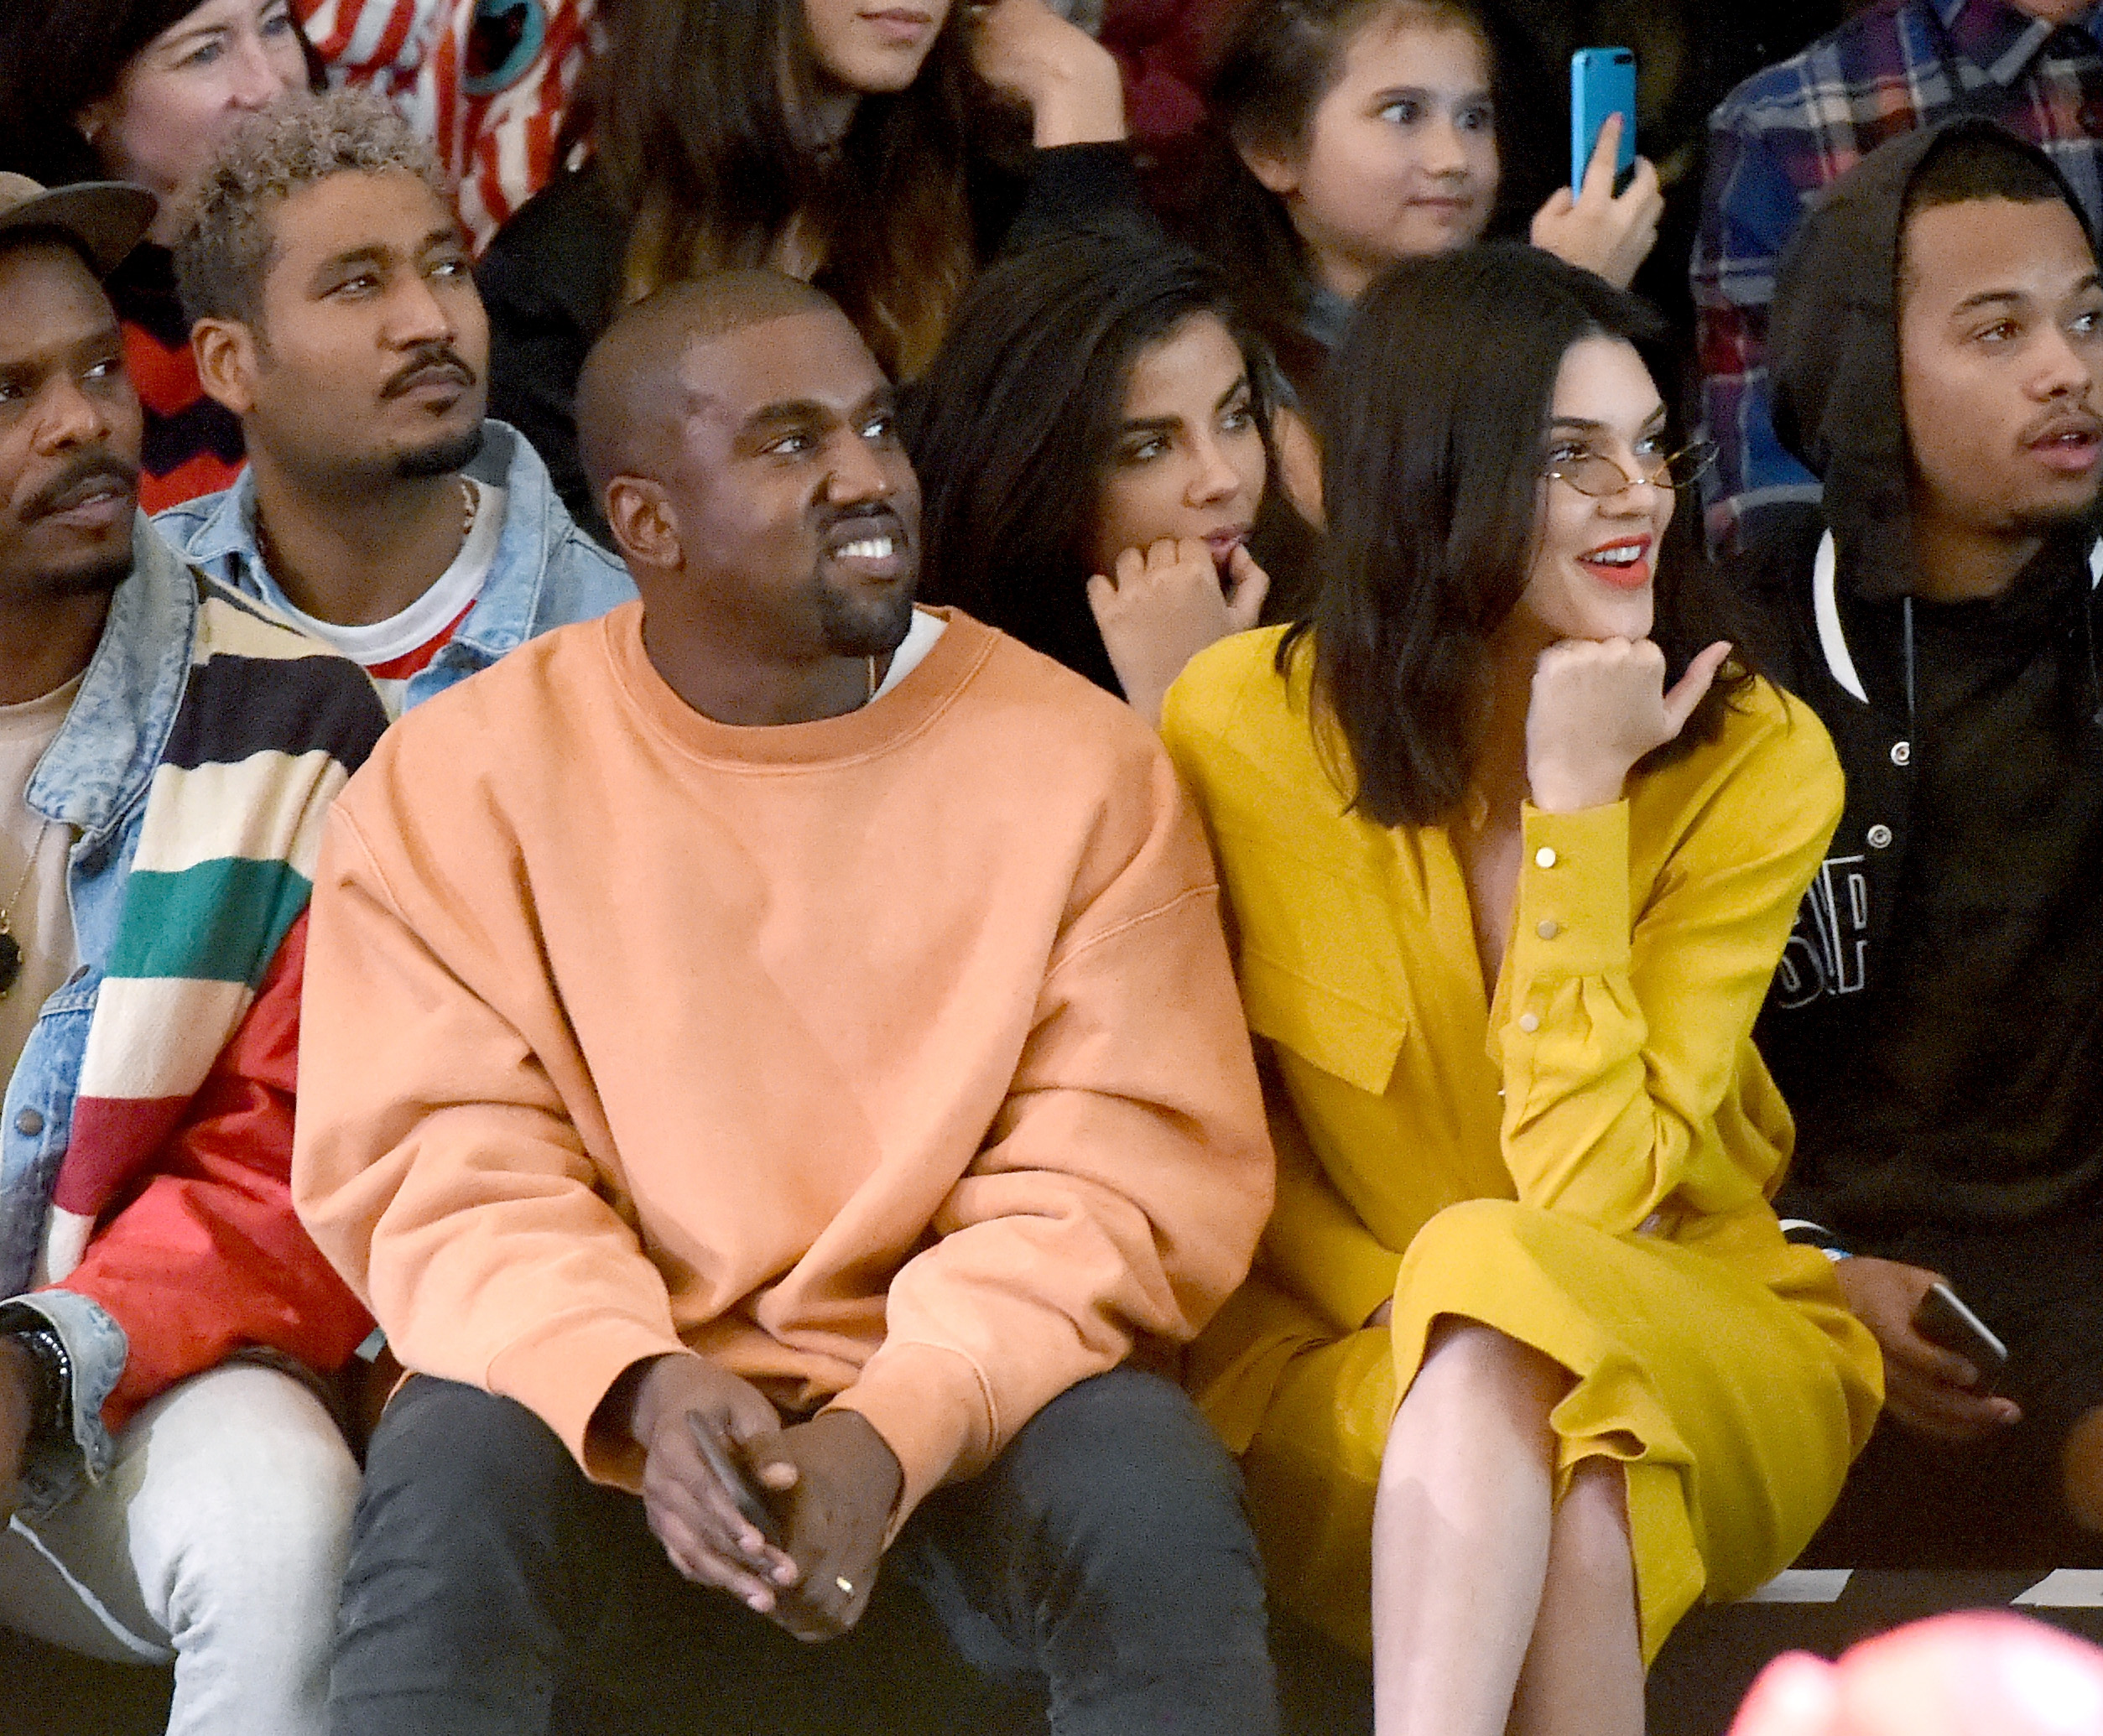 Kanye West And Virgil Abloh Share A Tearful Embrace At Fashion Show